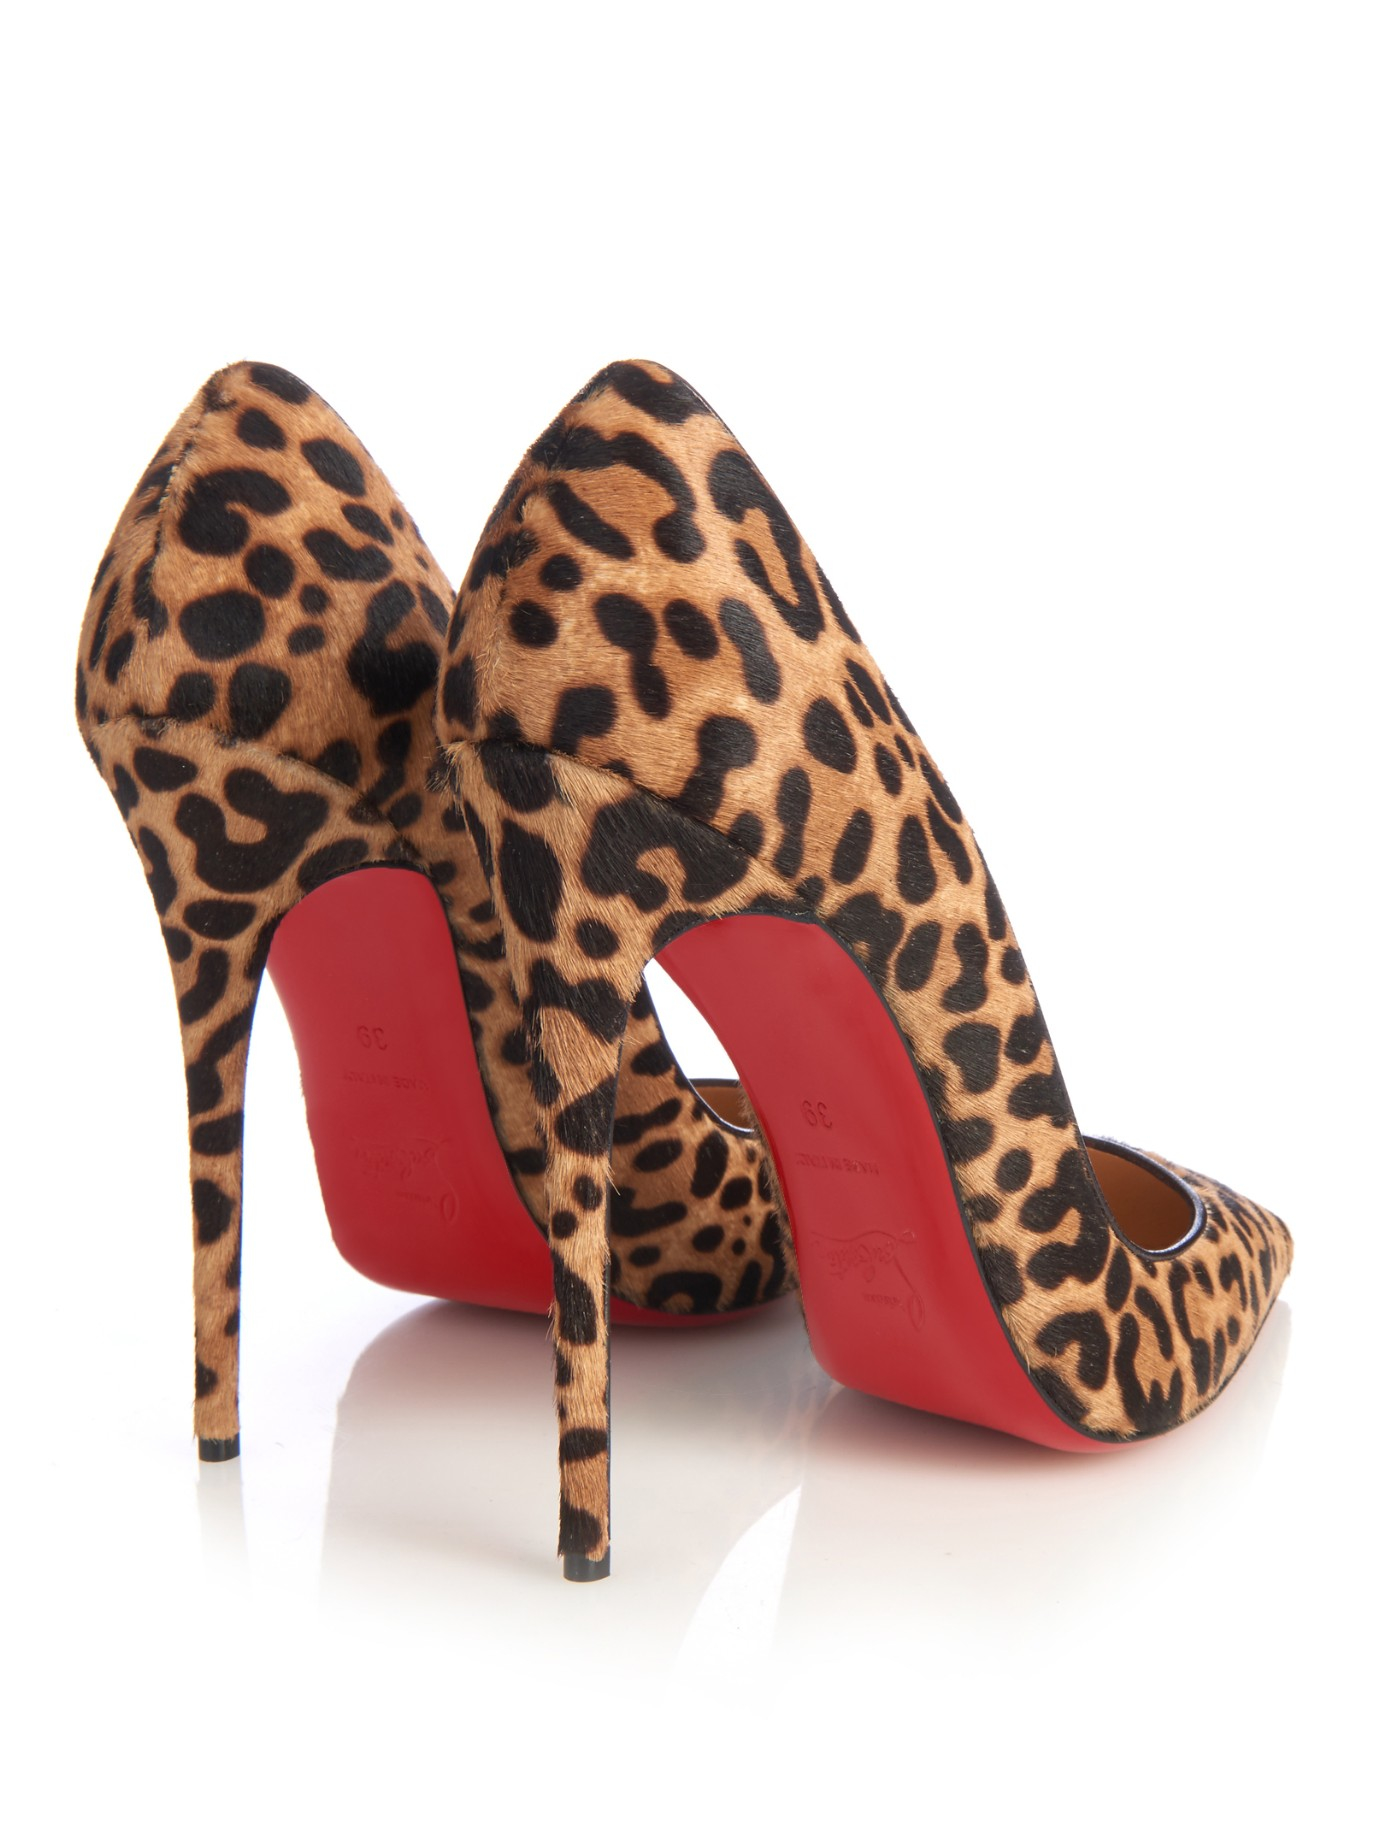 knock off red bottom shoes for women - christian louboutin ponyhair so kate pumps, christian louboutin ...